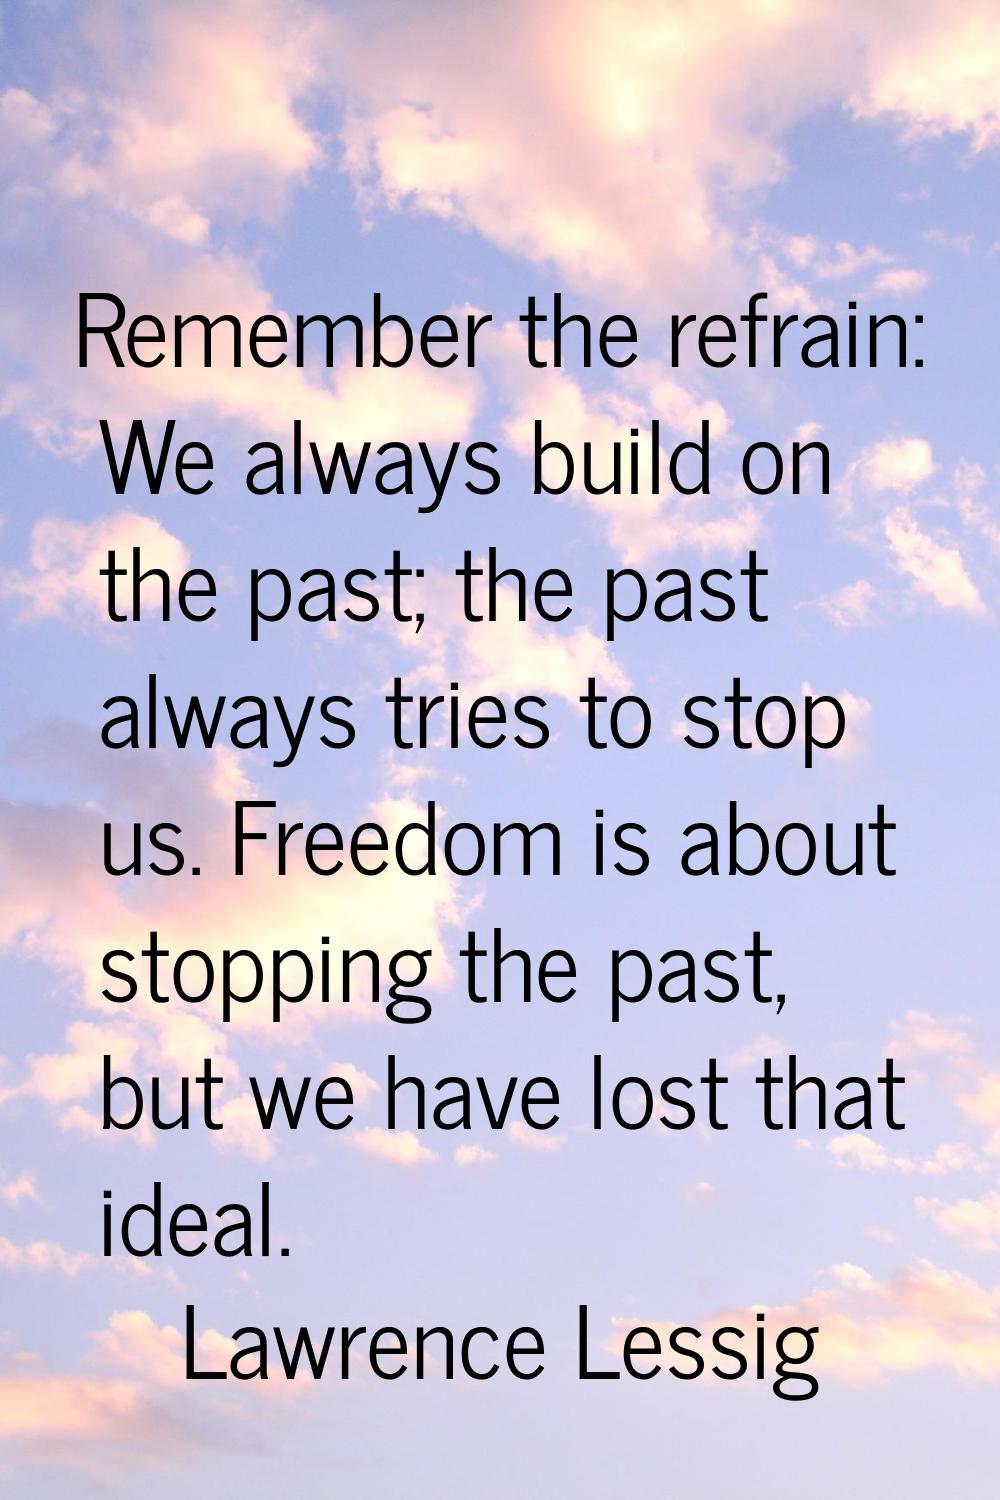 Remember the refrain: We always build on the past; the past always tries to stop us. Freedom is abo